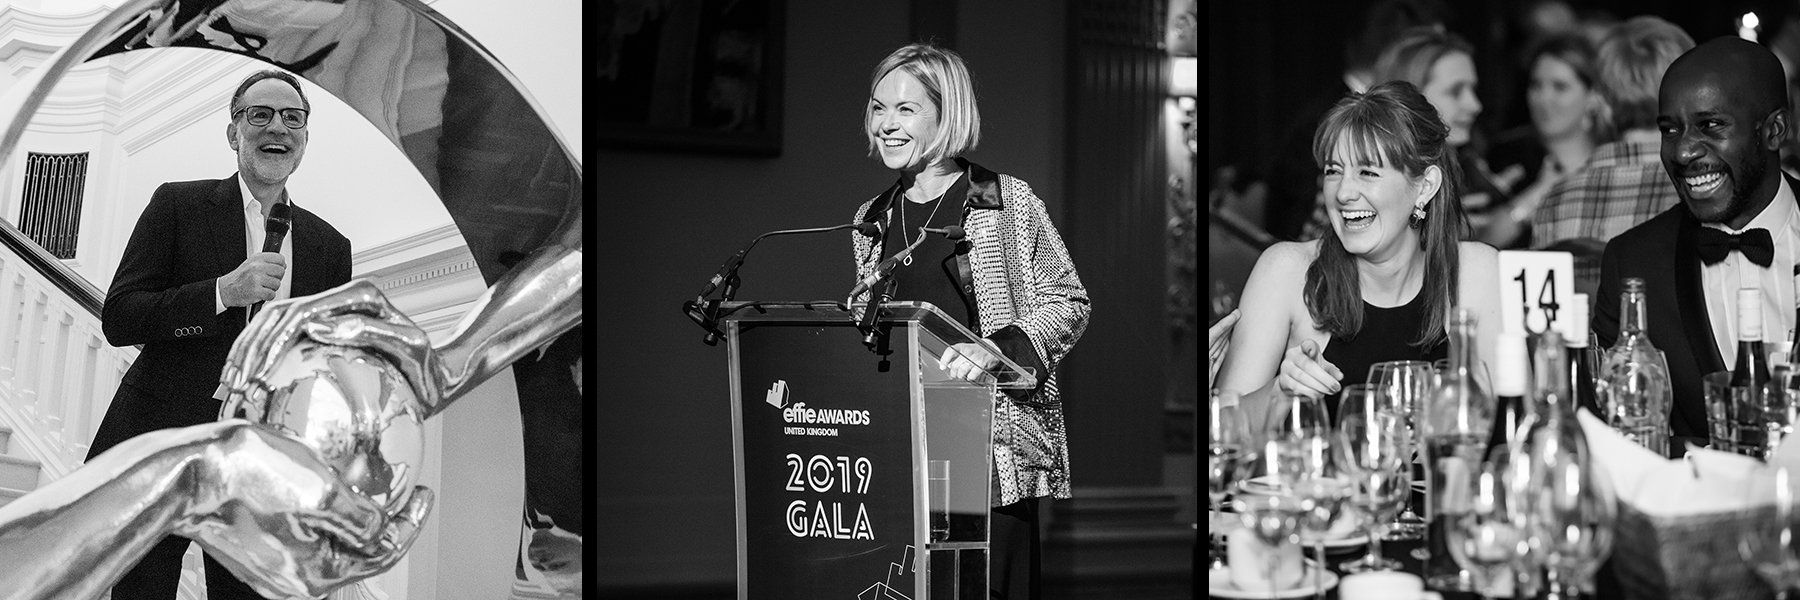 Event photography Reading Mariella Frostrup